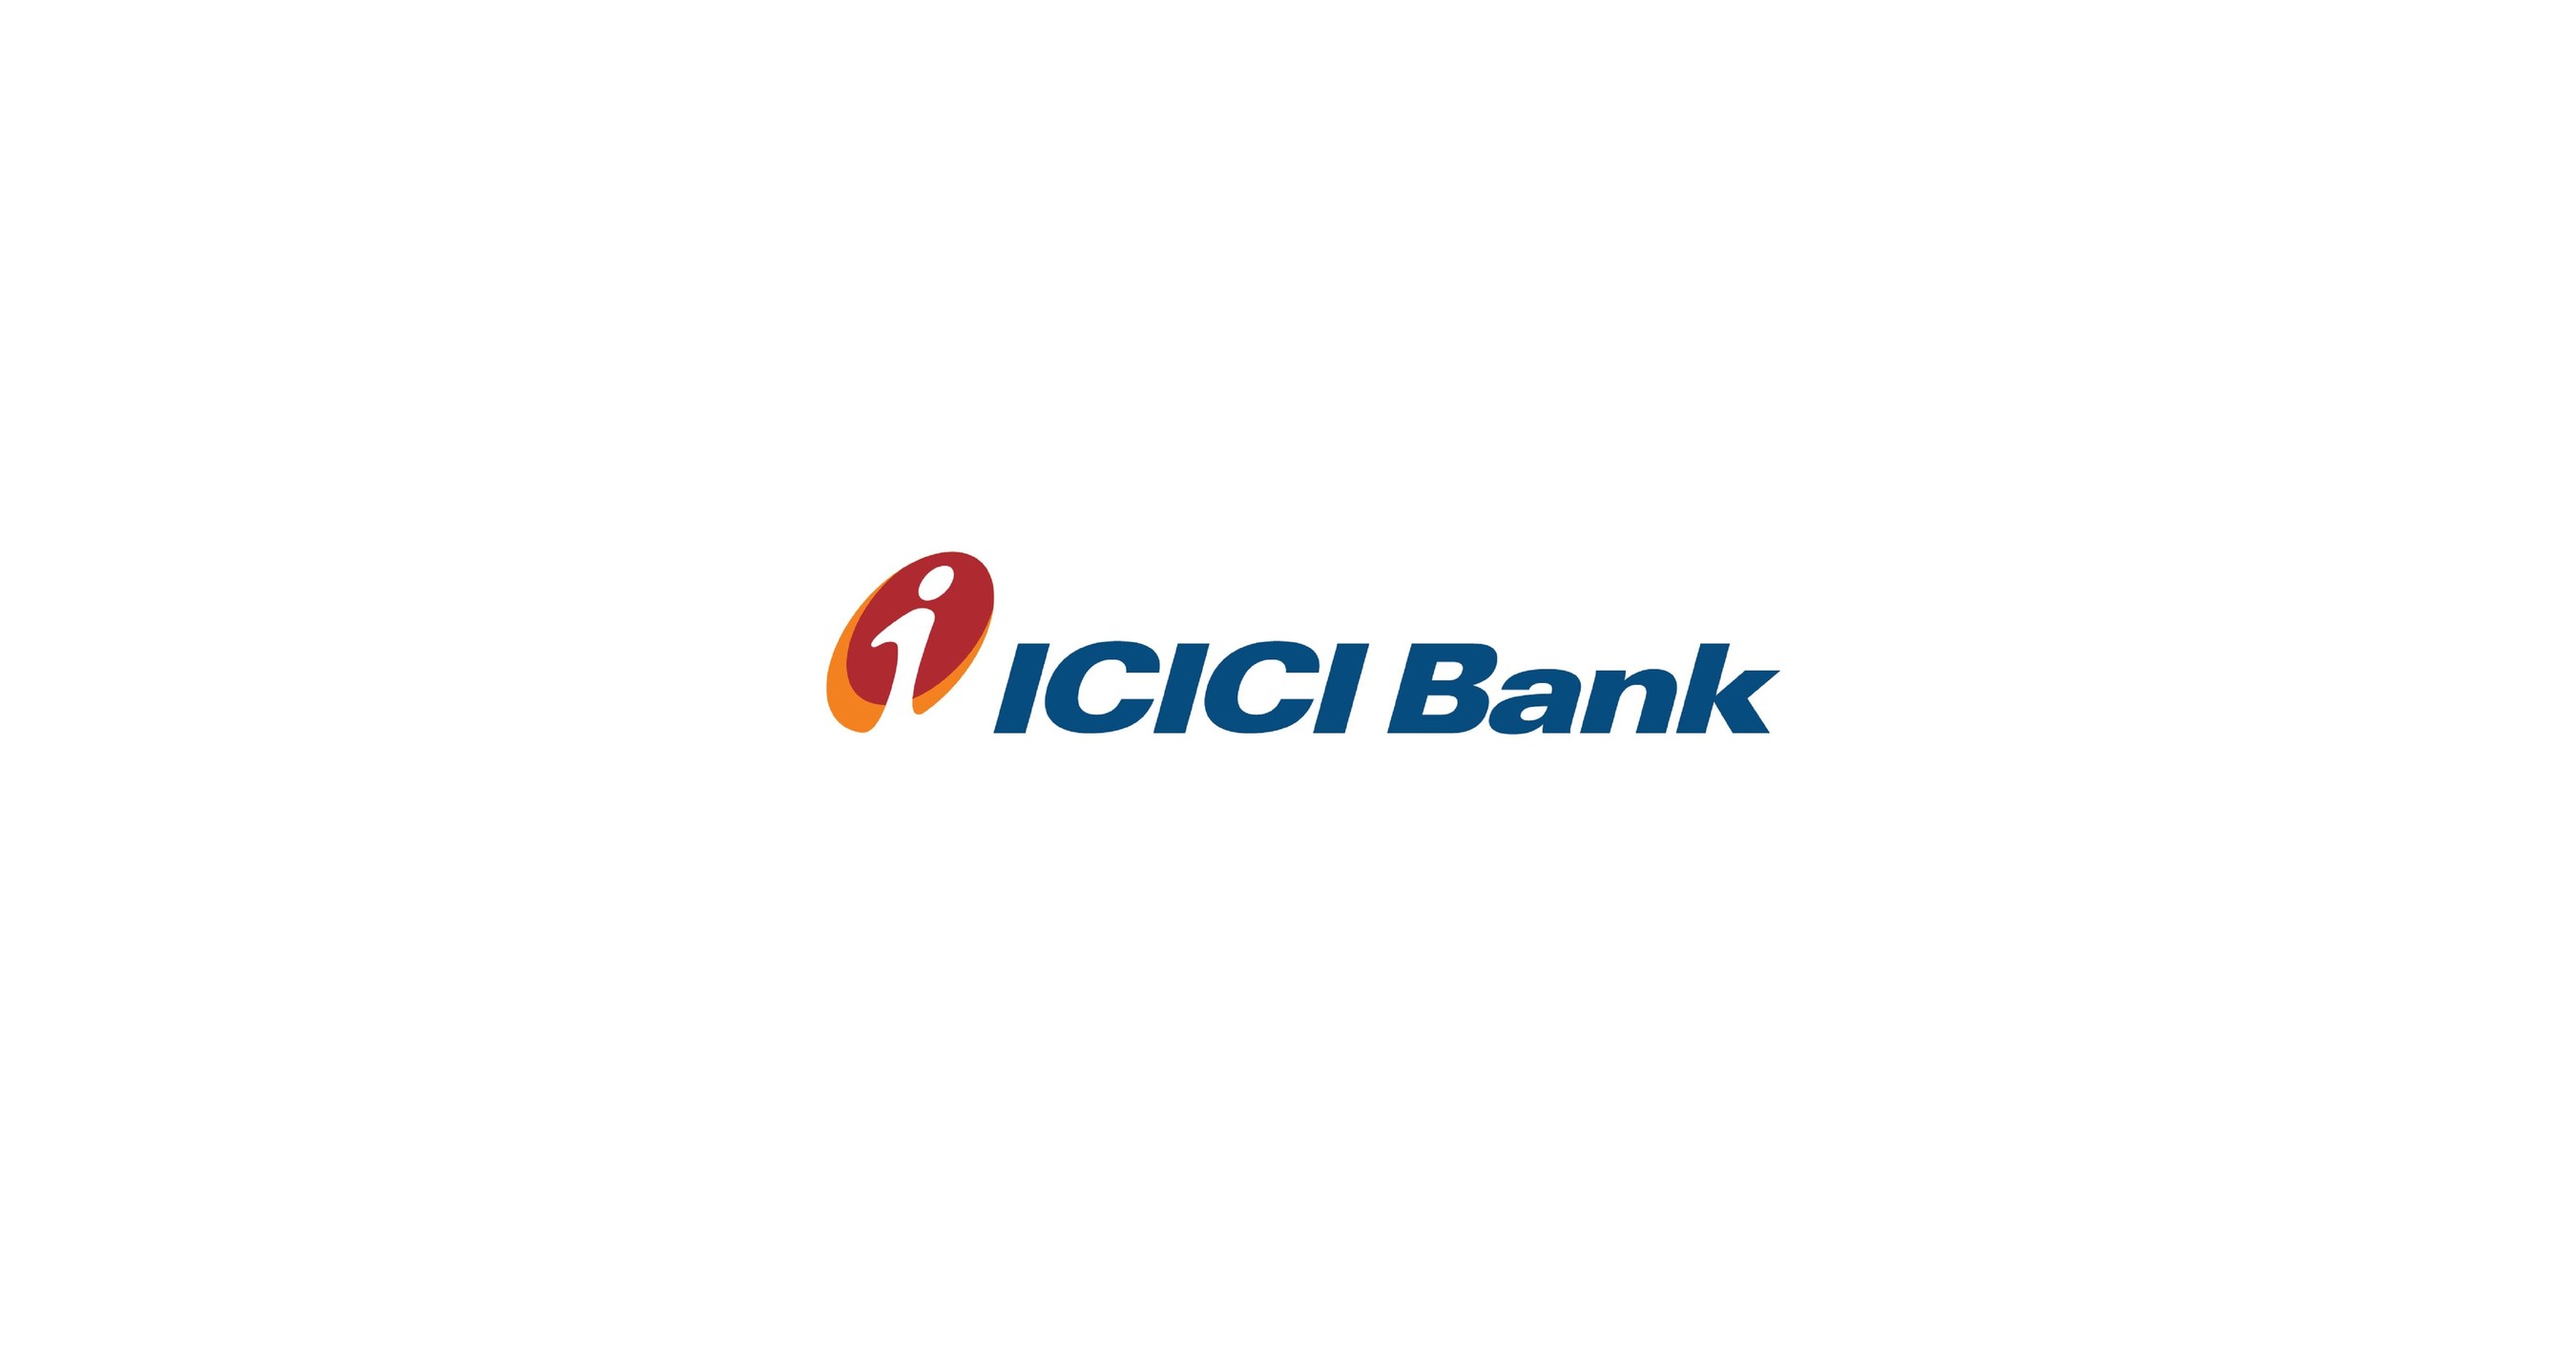 icici bank launches 'infinite india', a comprehensive online platform for foreign companies setting up operations in the country